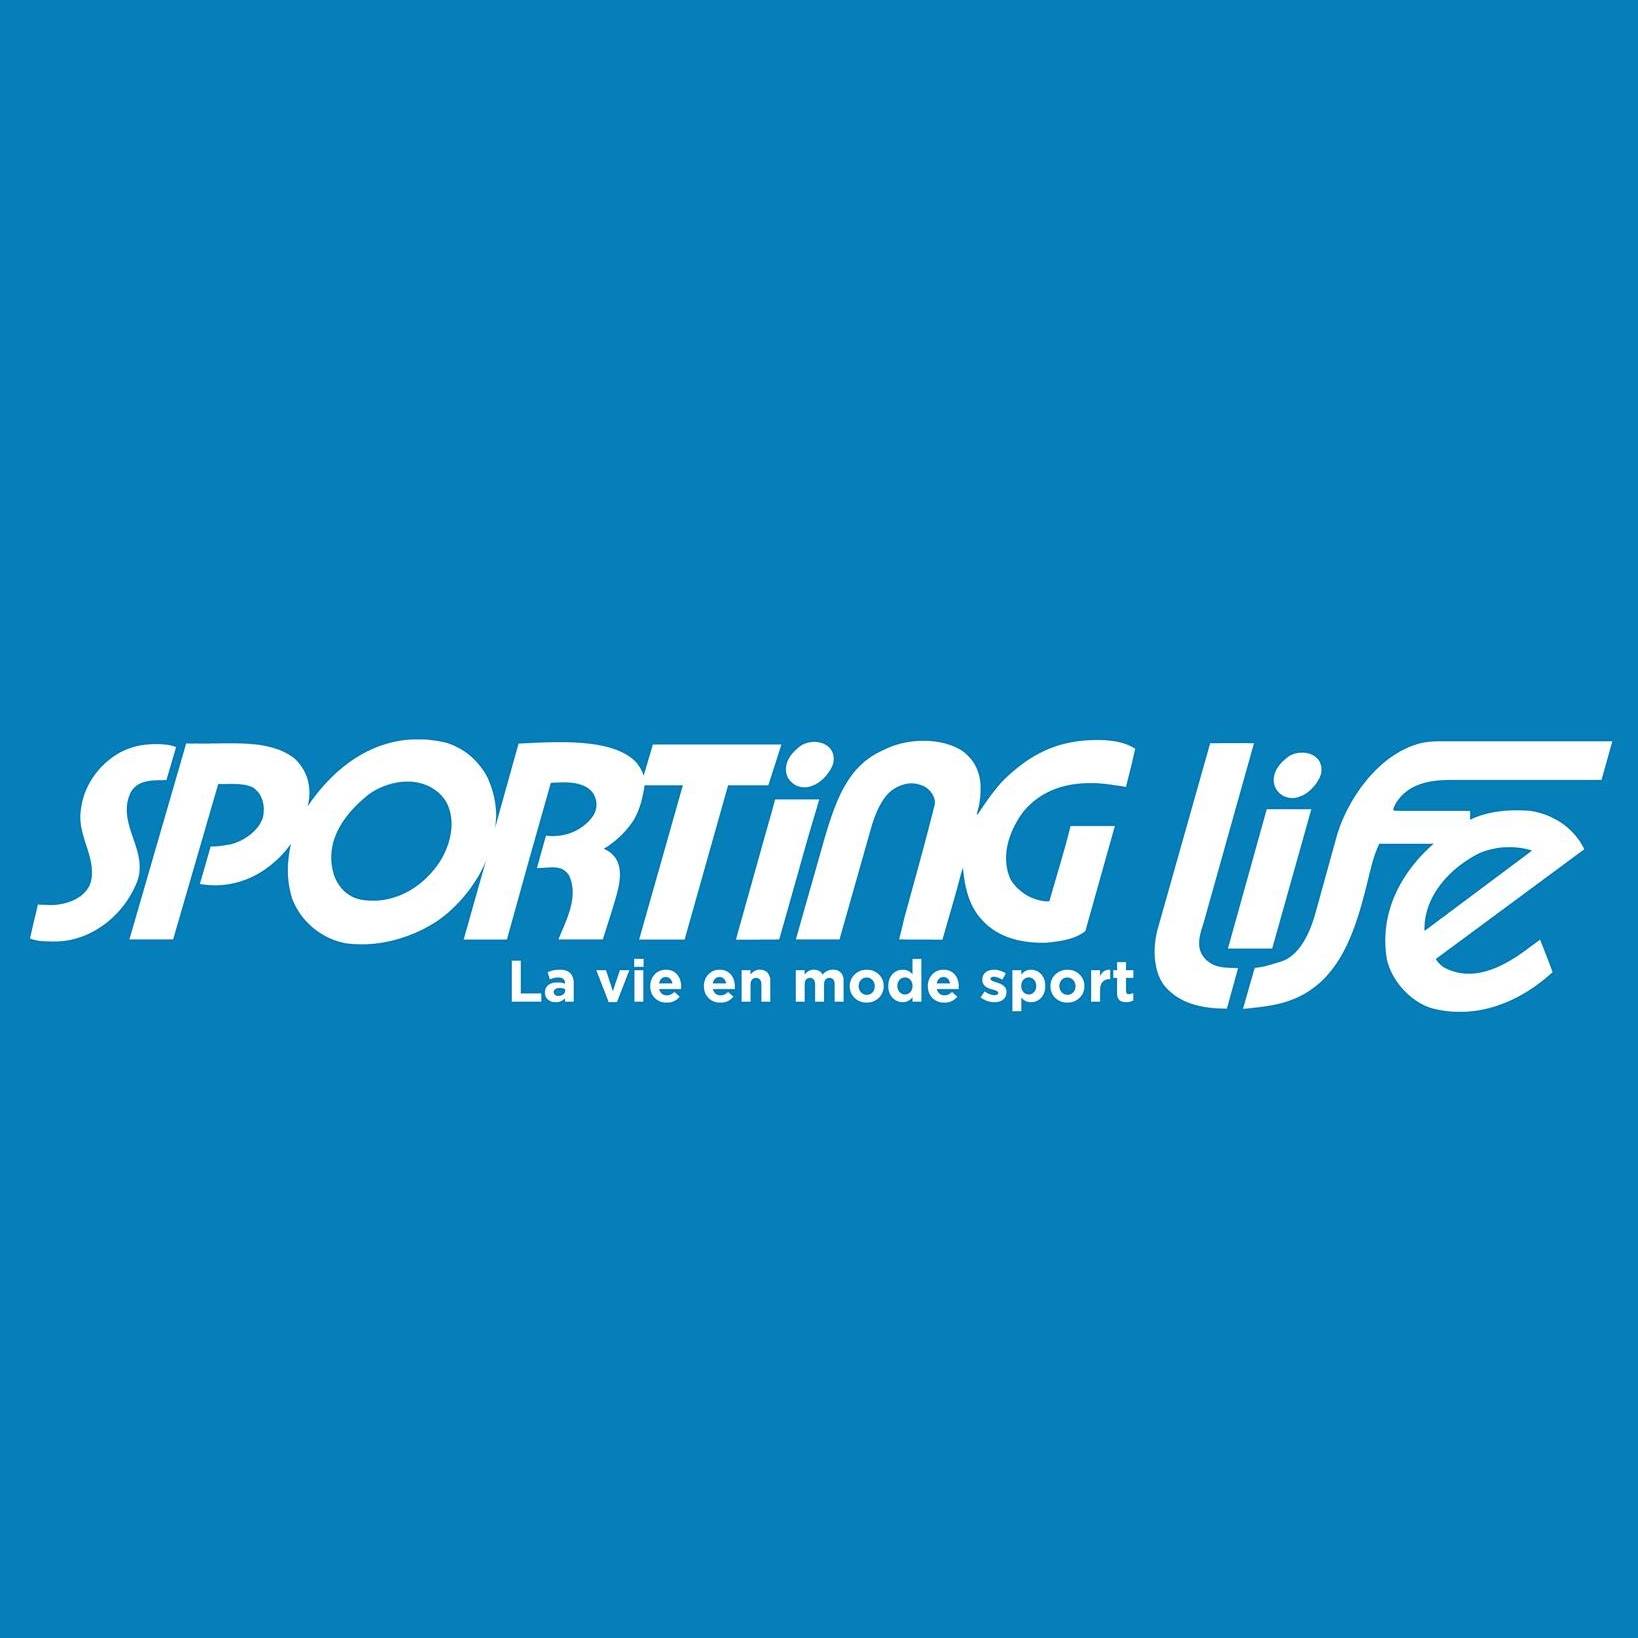 Annuaire Sporting Life